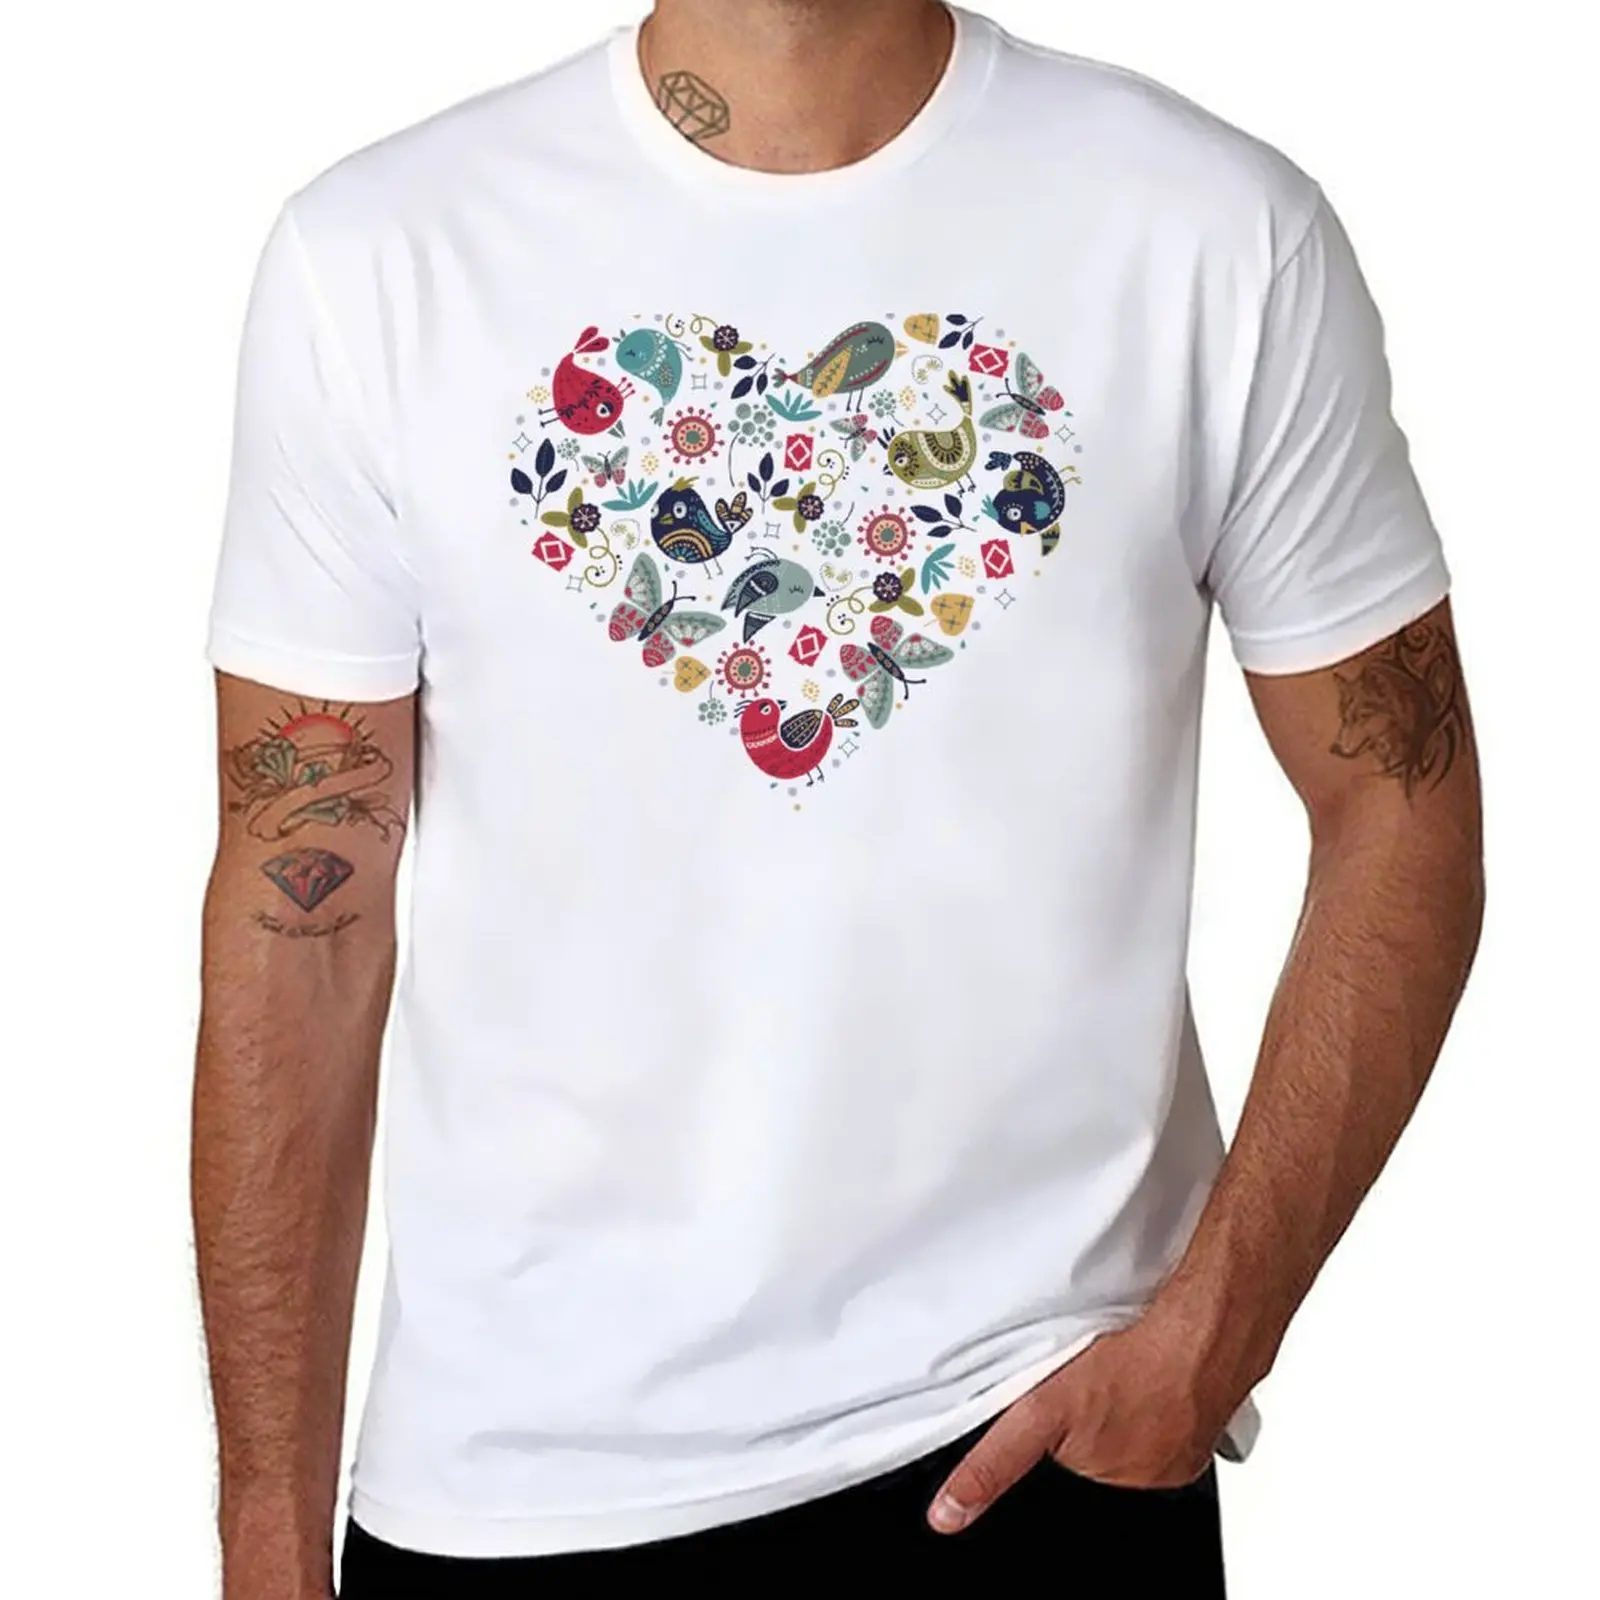 

New Nordic Style With Birds, Flowers and Butterflies T-Shirt kawaii clothes quick drying t-shirt mens t shirts casual stylish